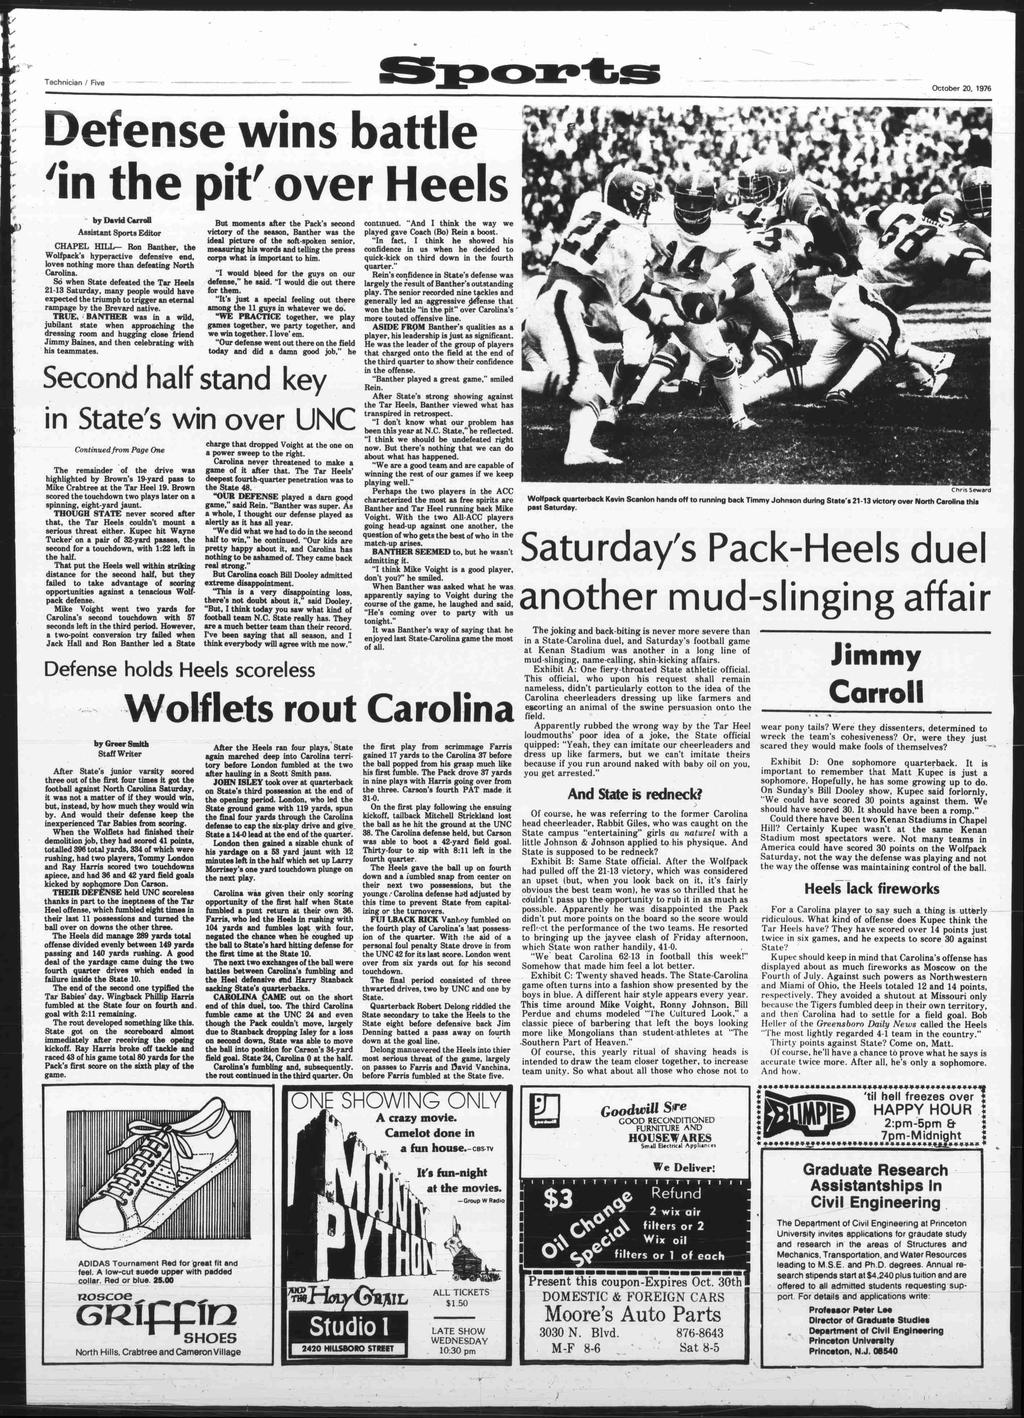 Technicin / Five October 20, 1976 Defense in by Dvid Crroll Assistnt Sports Editor CHAPEL HILL- Ron Bnr Wolfpck s hyperctive defensive end loves nothing more thn defeting North Crolin 86 when Stte